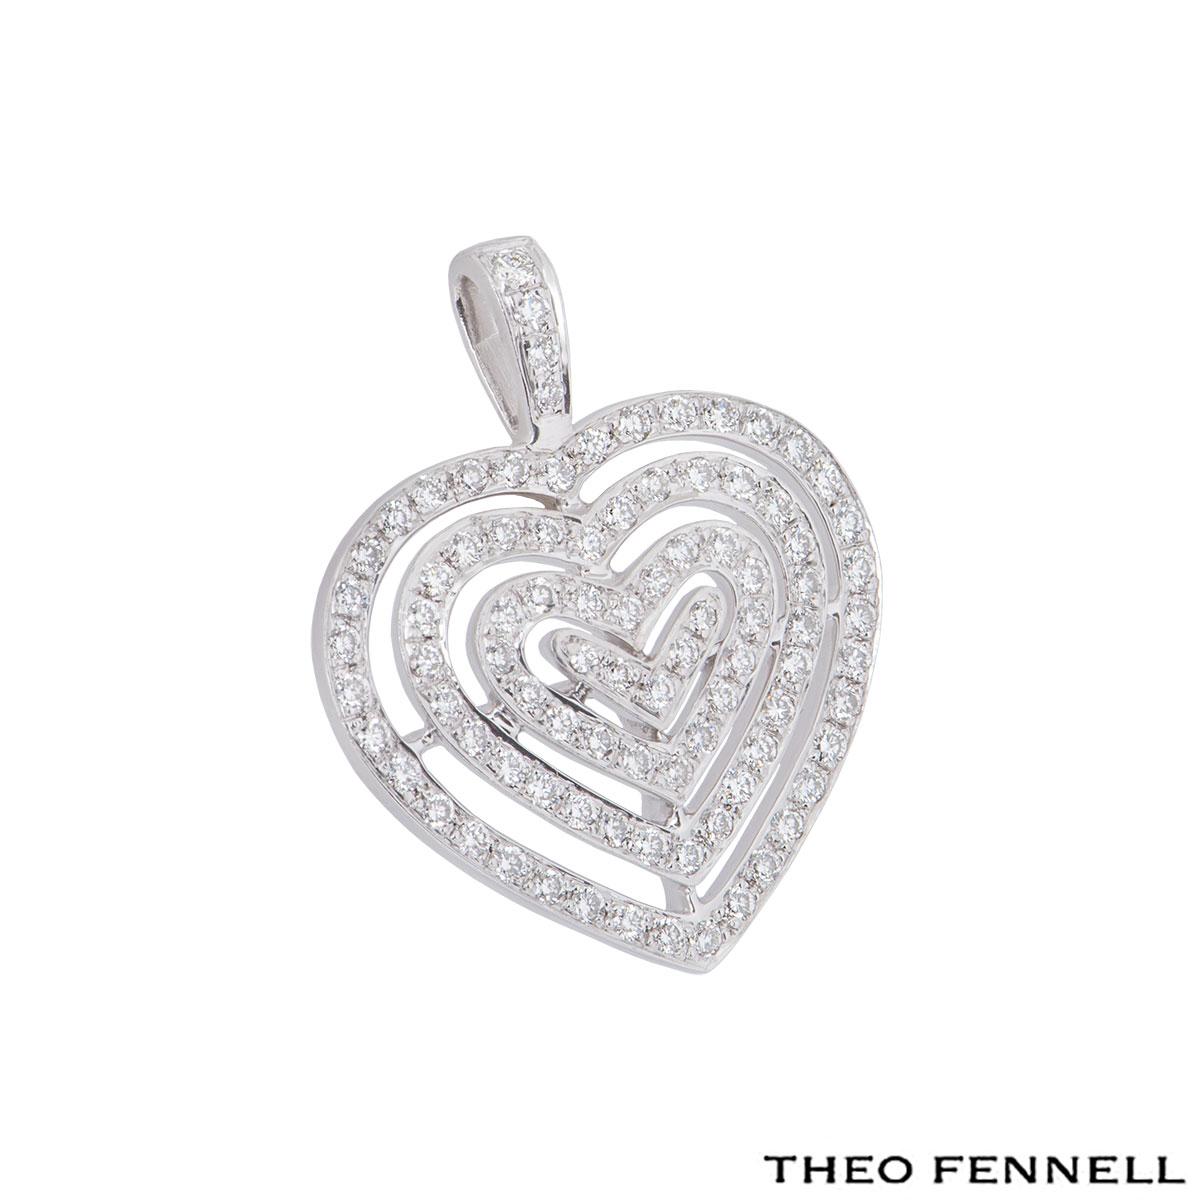 A beautiful 18k white gold diamond heart pendant by Theo Fennell. The openwork design consists of 4 hearts set inside each other with round brilliant cut diamonds in a pave setting with an approximate weight of 1.04ct. The heart motif features a